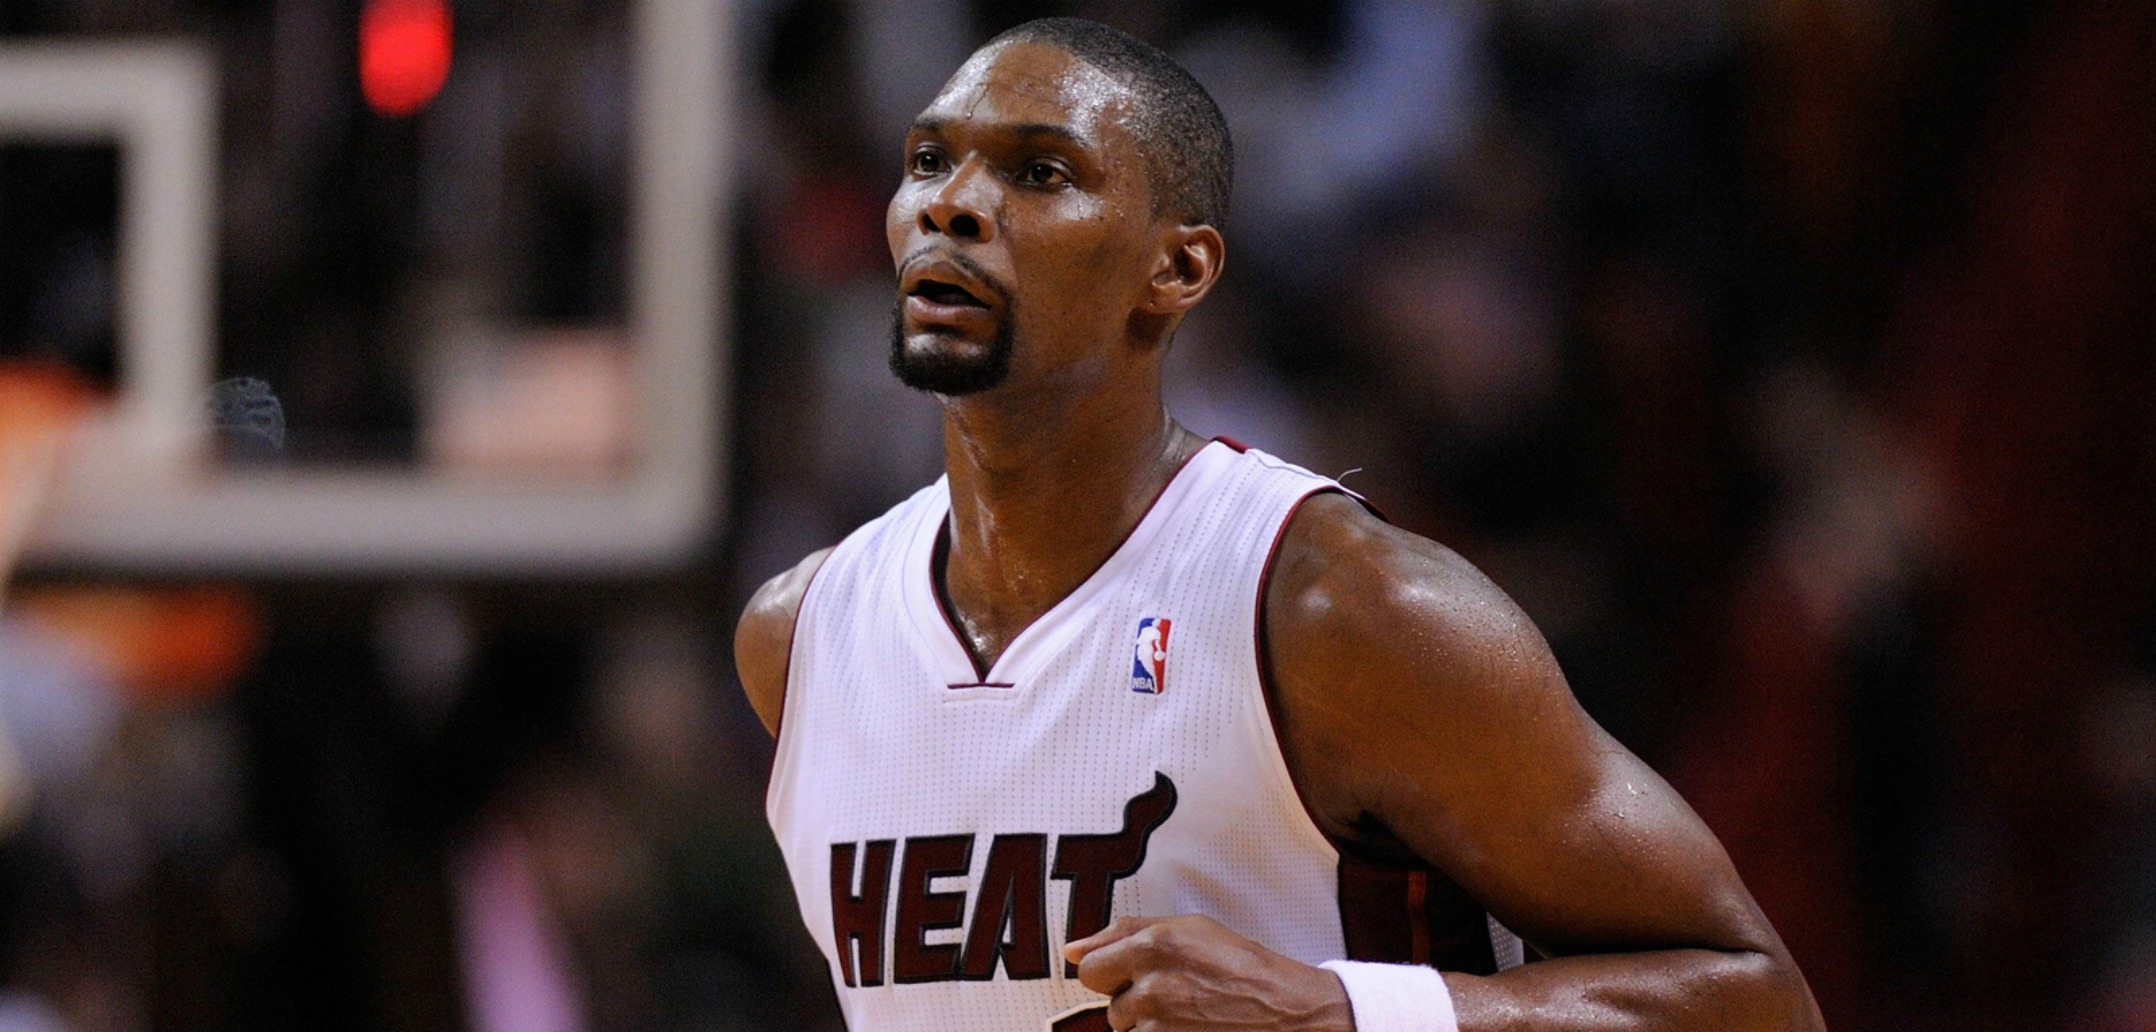 Courtesy of Fox Sports: Expect Chris Bosh to return to form after taking back seat to LeBron. 